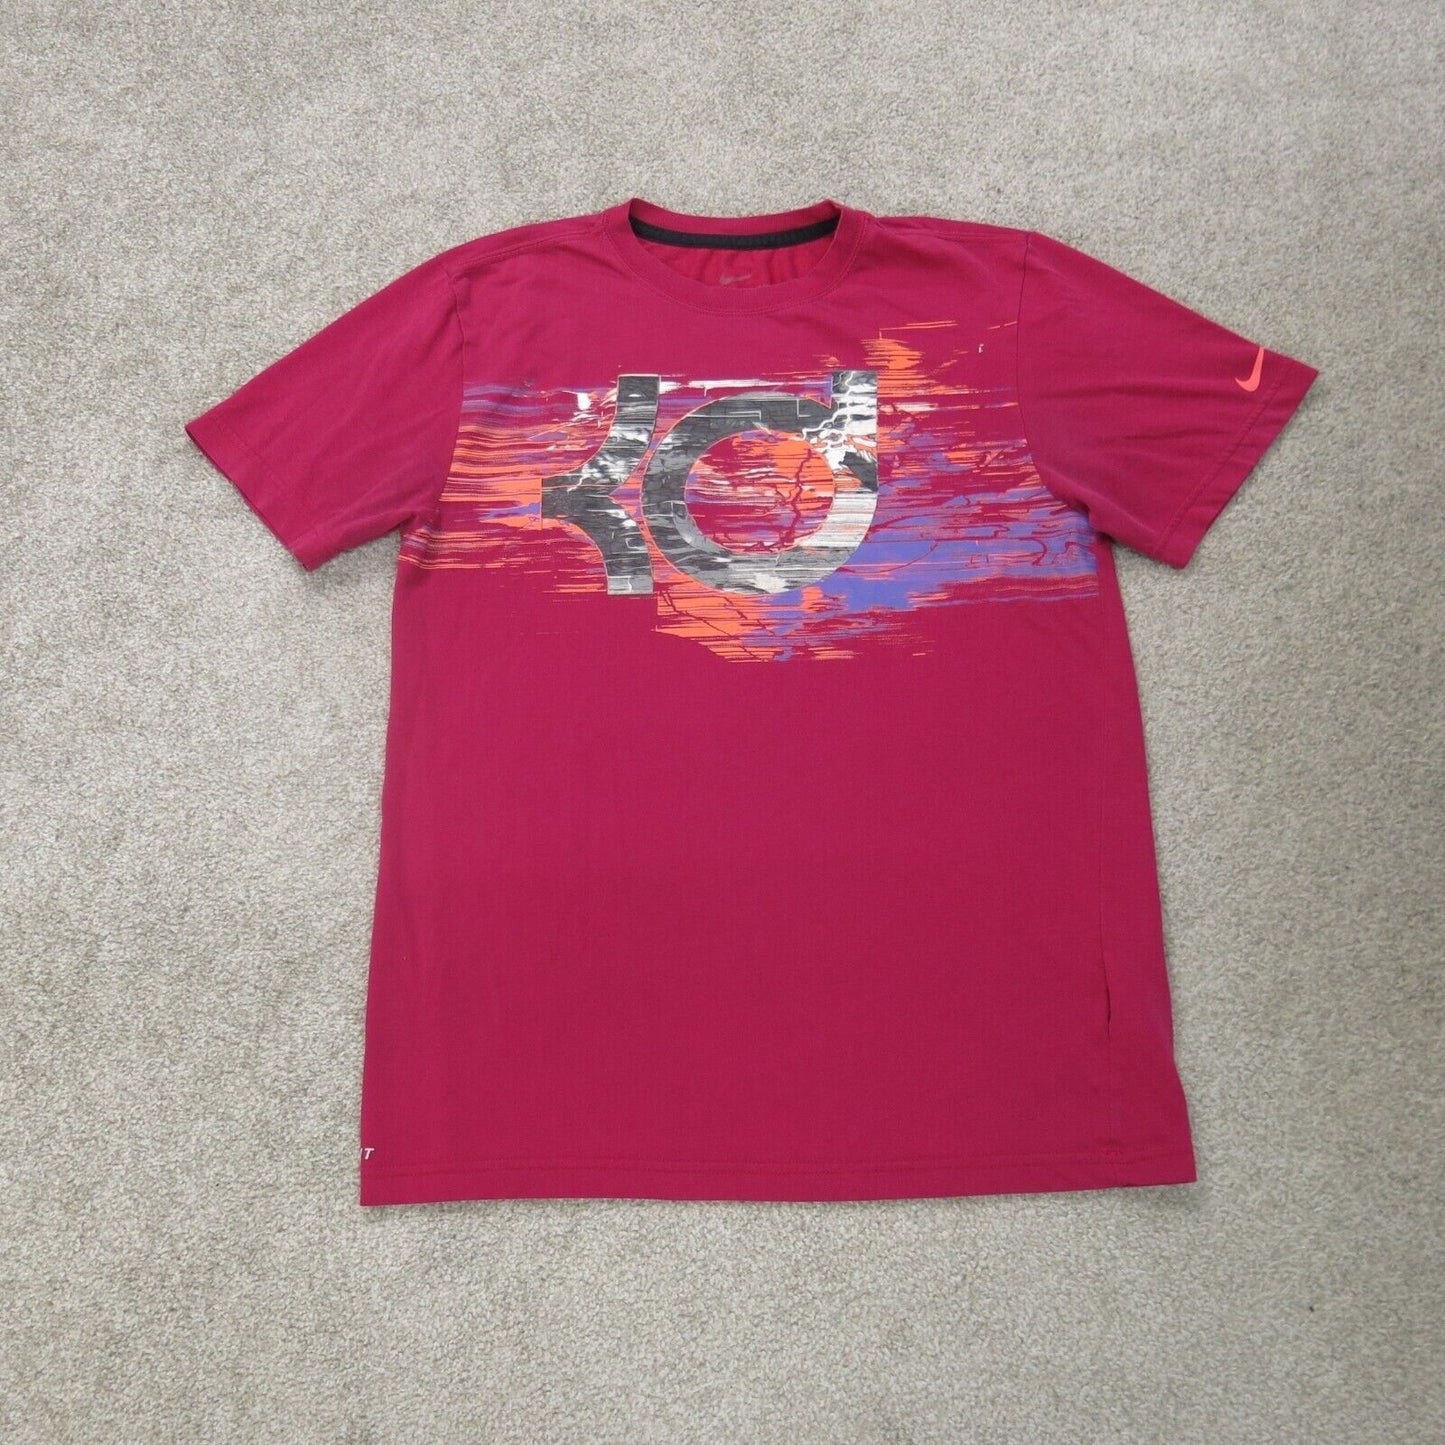 Nike Shirt Mens Small Pink Crew Neck Graphic Tee Lightweight Outdoors Dri Fit